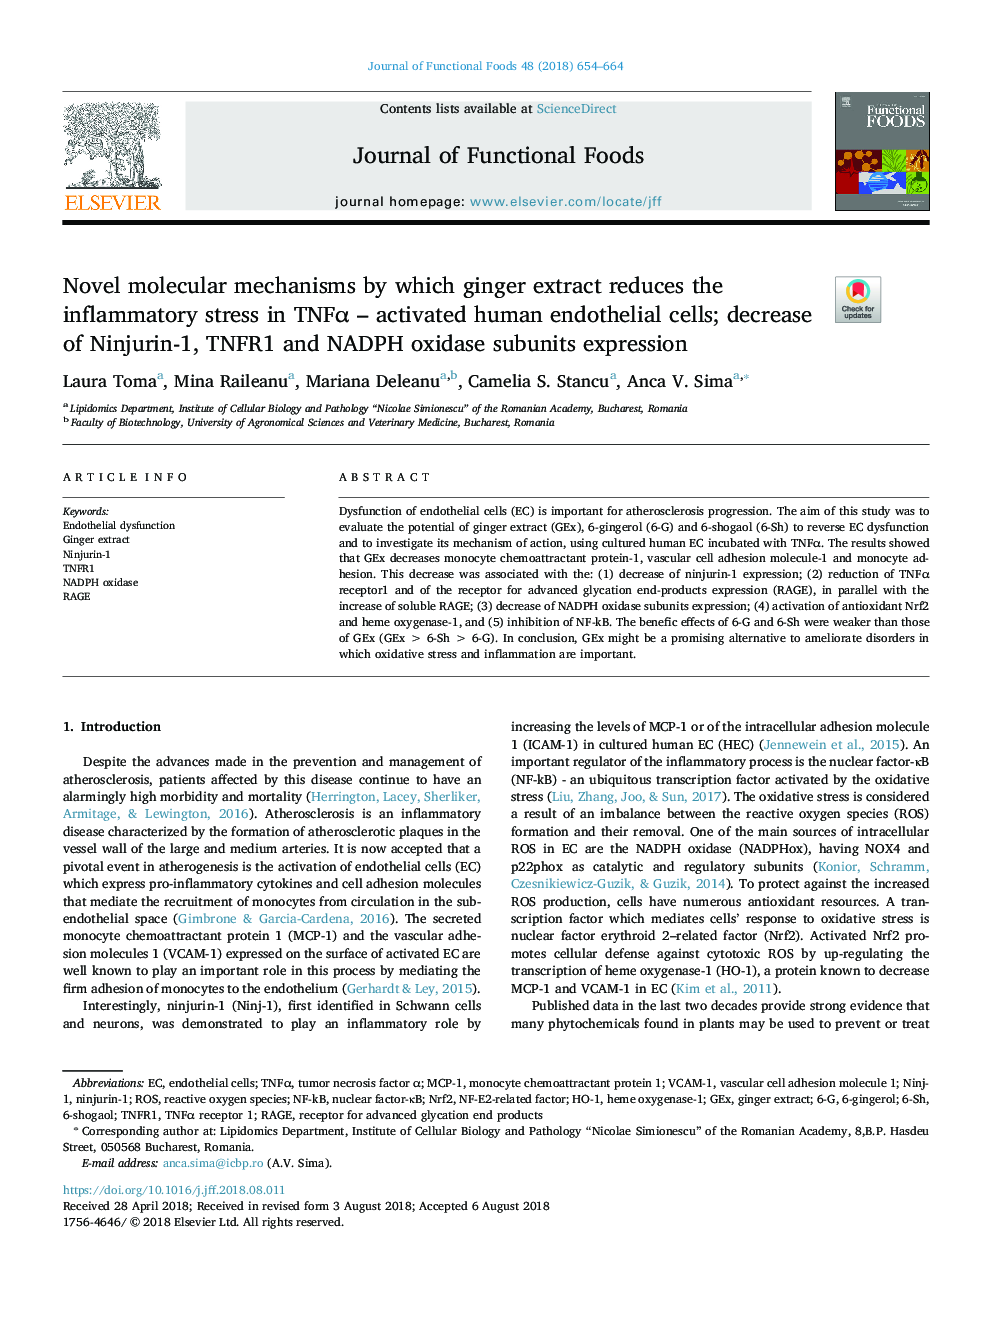 Novel molecular mechanisms by which ginger extract reduces the inflammatory stress in TNFÎ± - activated human endothelial cells; decrease of Ninjurin-1, TNFR1 and NADPH oxidase subunits expression